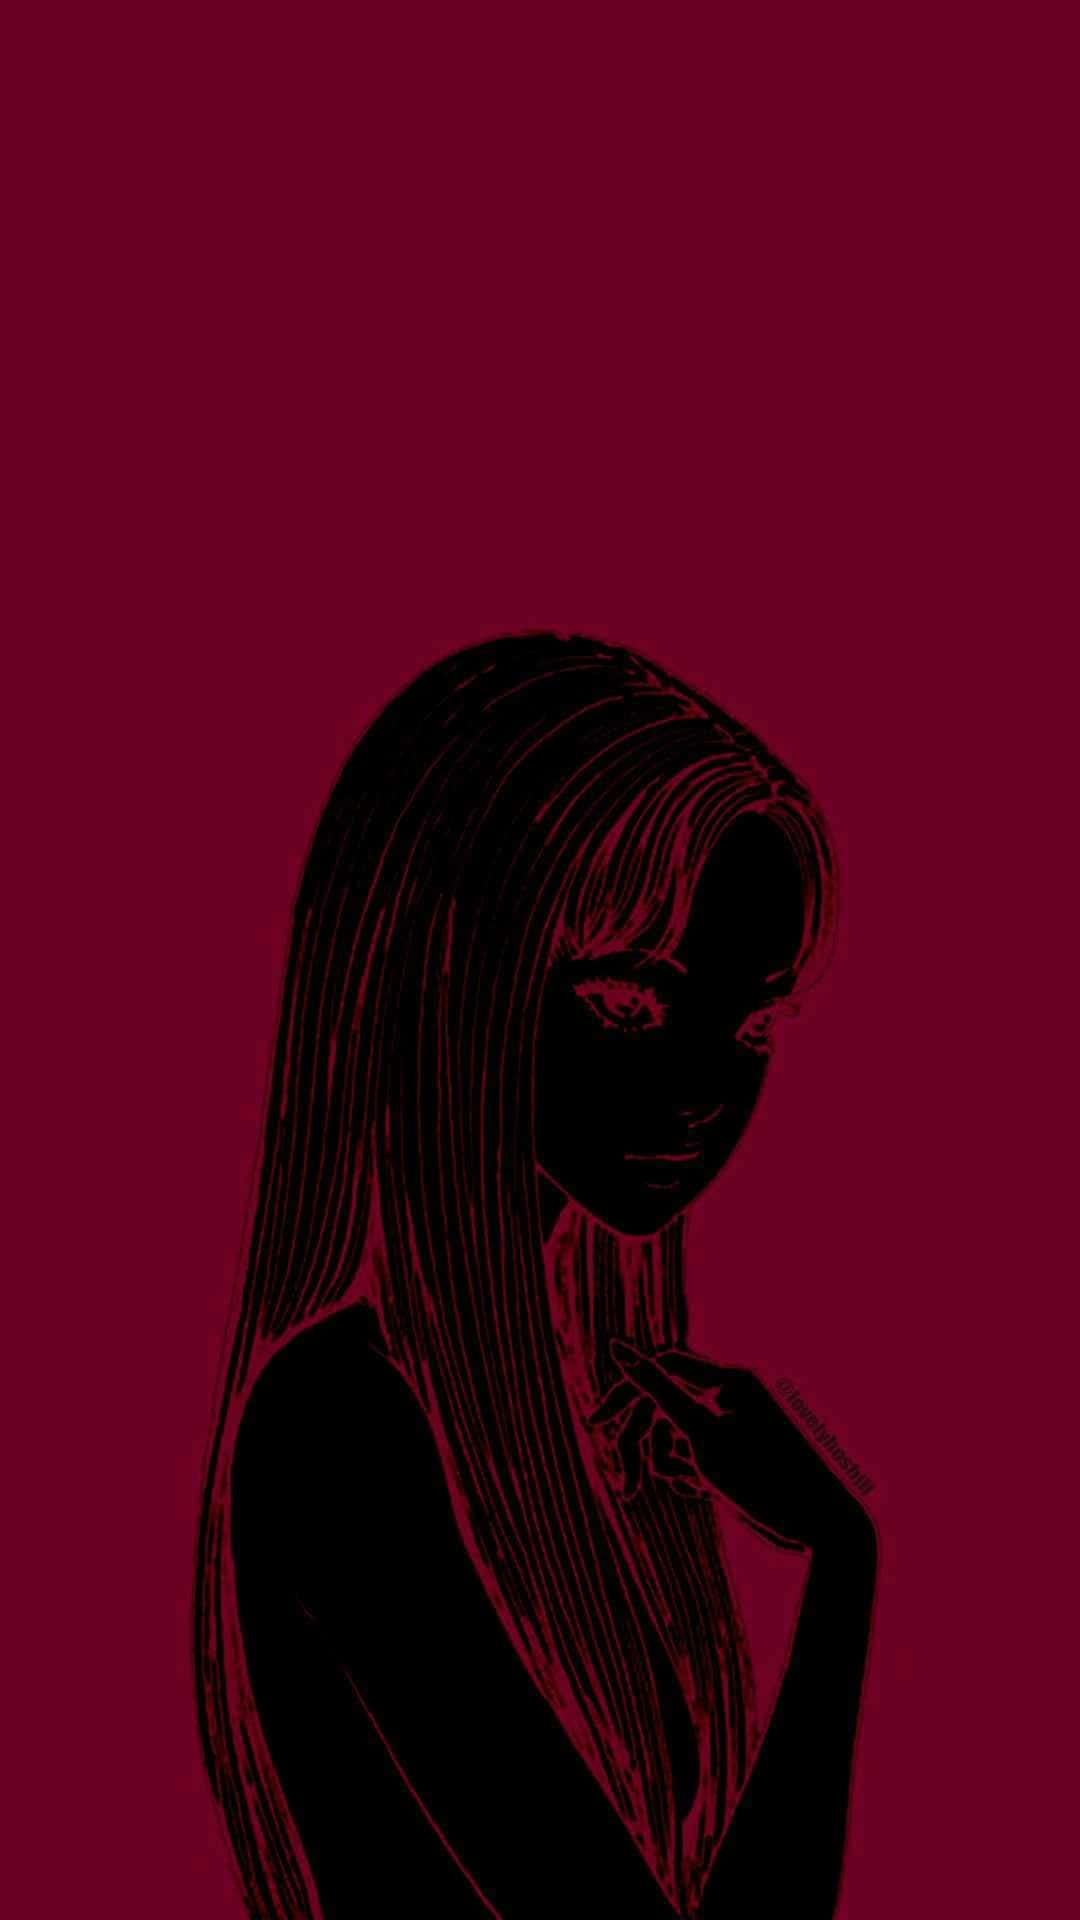 Tomie In Silhouette Wallpaper